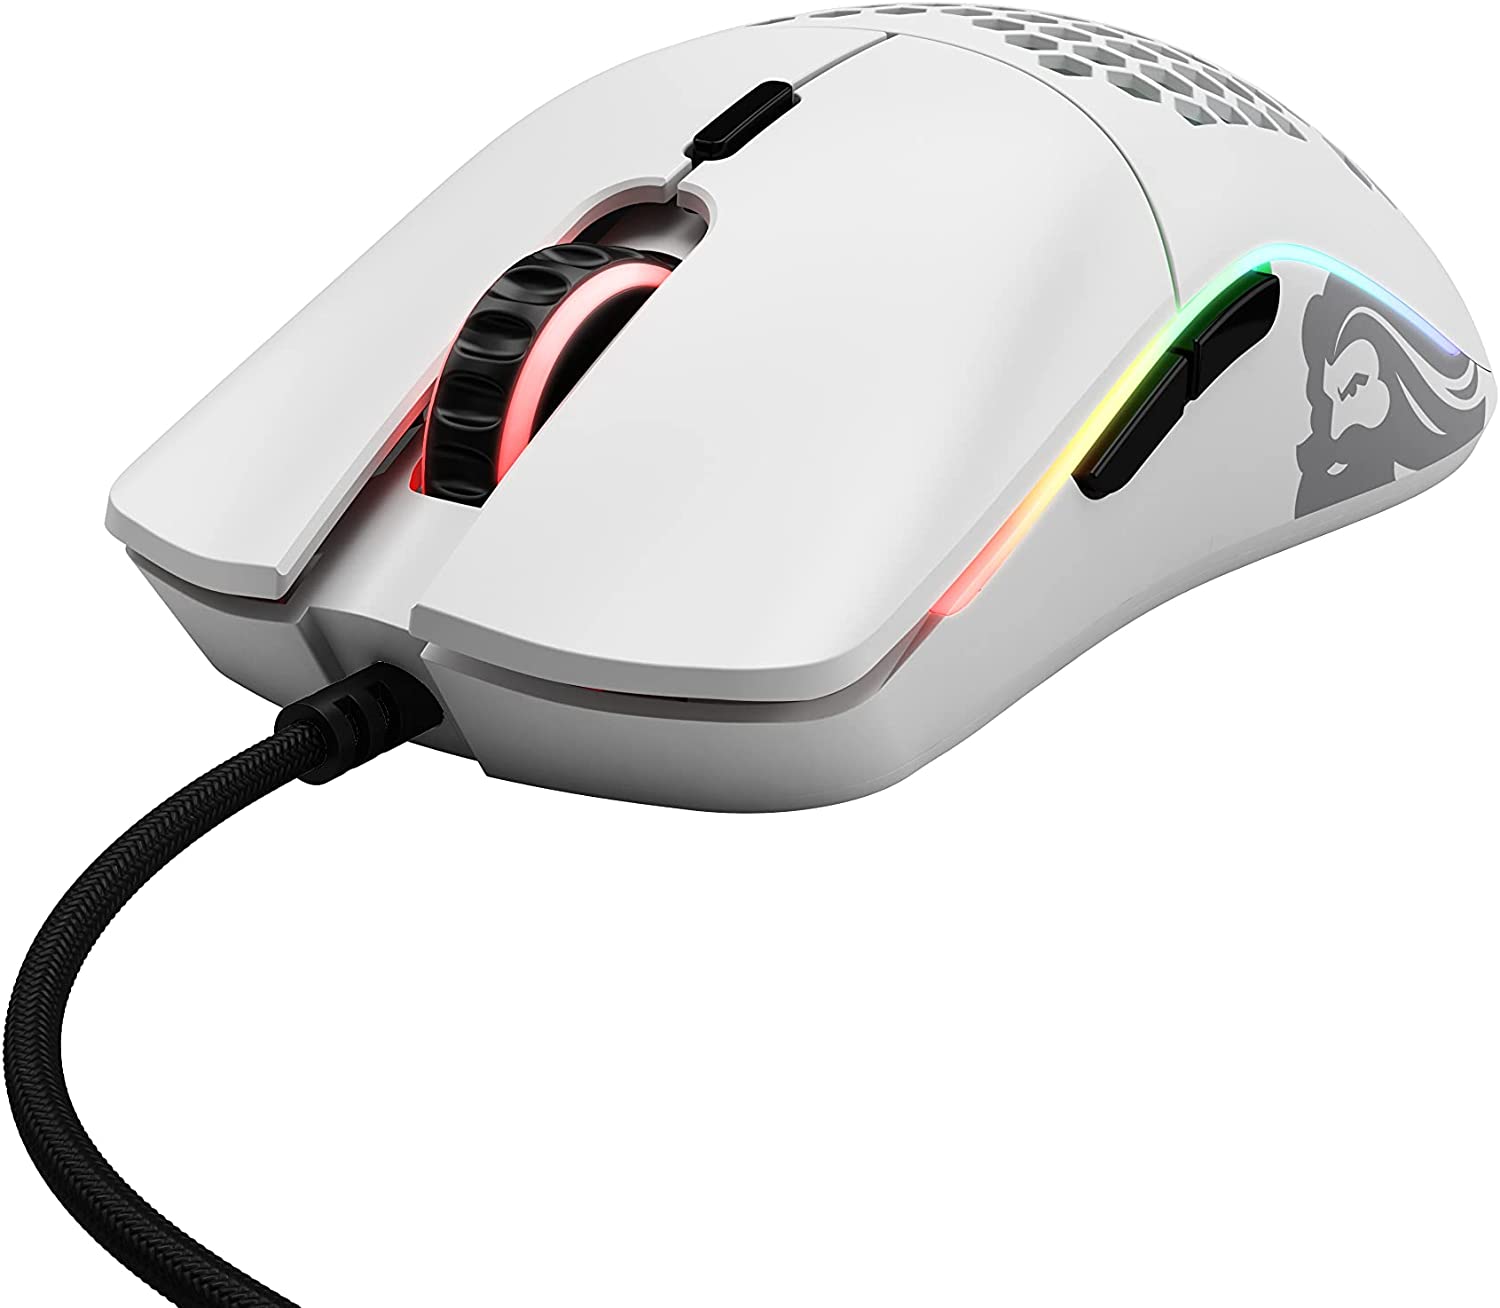 GLORIOUS MODEL O MATTE WHITE WIRED MOUSE - GO-WHITE-N